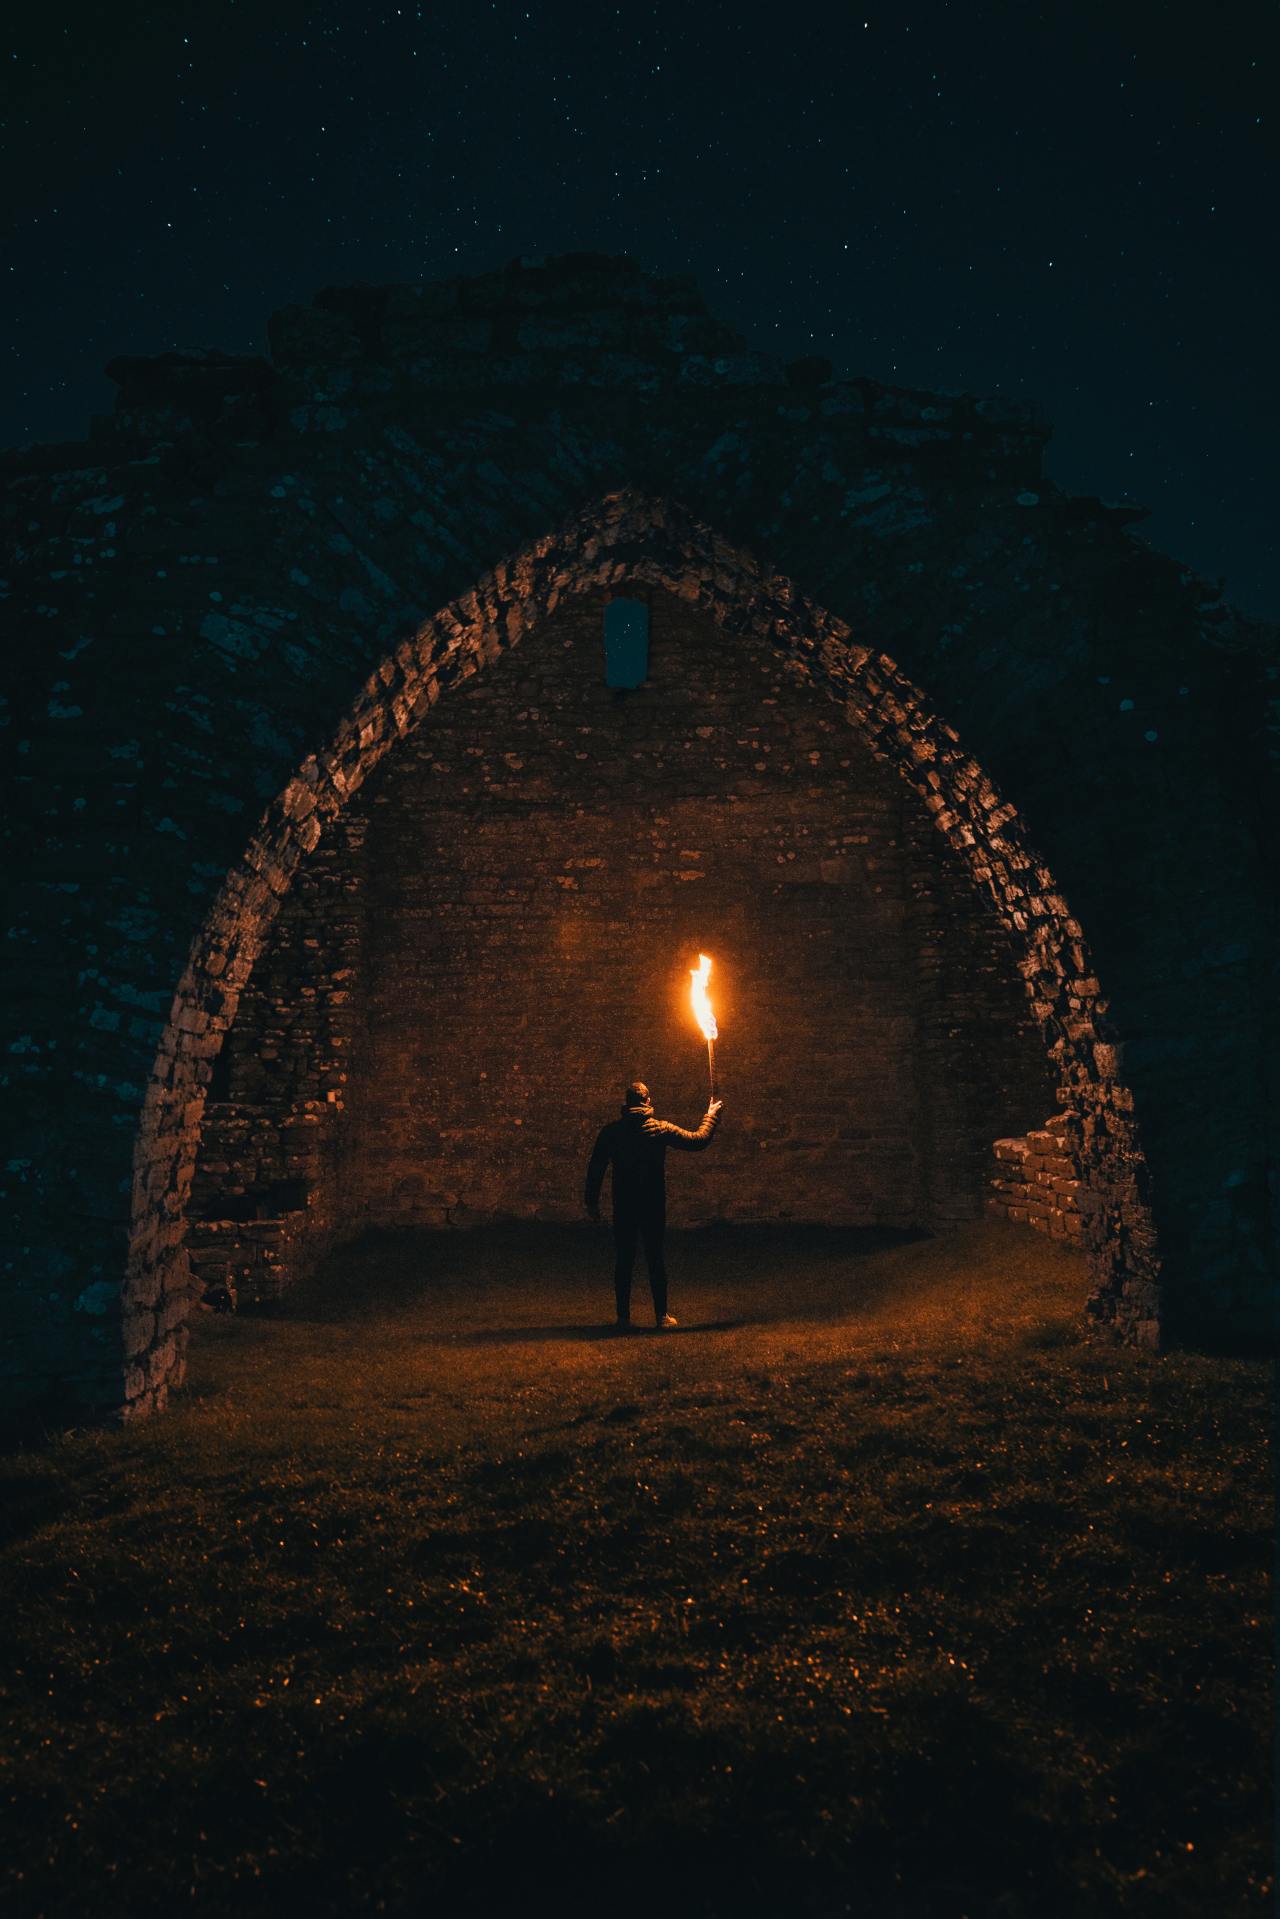 Linus Sandvide Gråborg, Färjestaden, Sweden Me and my friend packed our car with old tshirts, a stick, lighter and our camera bags. Drove to a old ruin and started do our magic. #ruins#torch#photography#stonework#castles#exploring